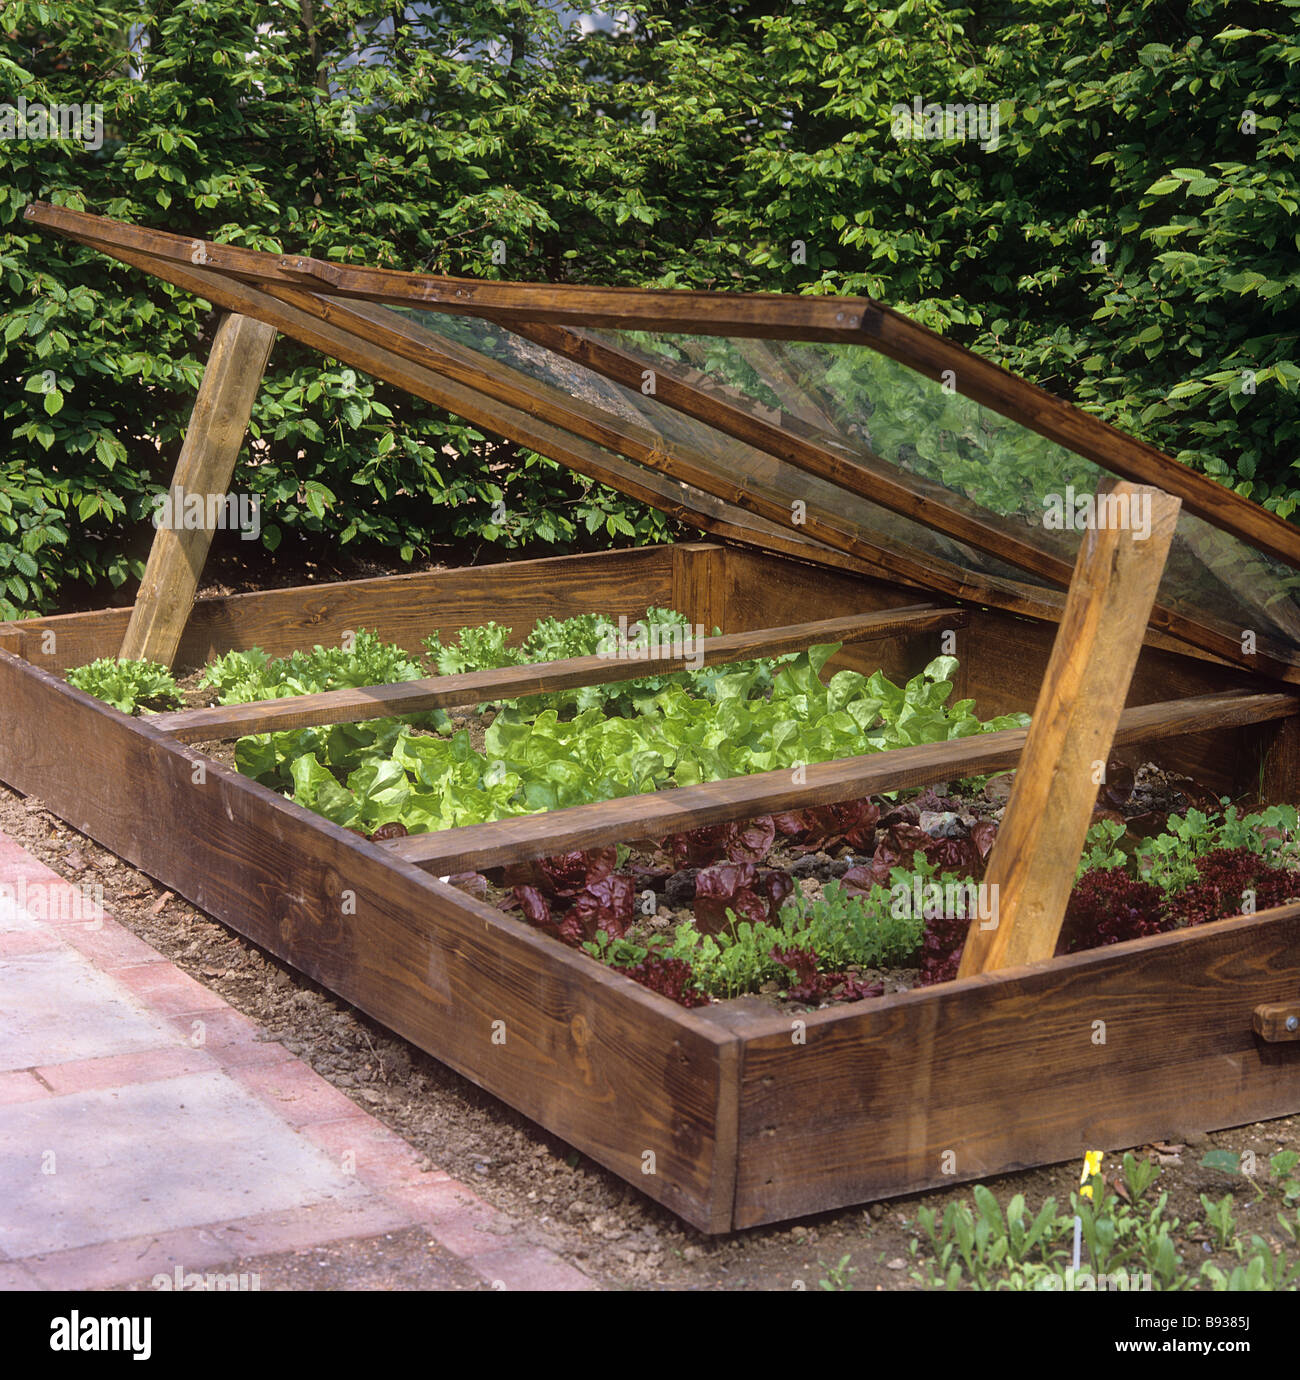 cold frame with different lettuces / Lactuca sativa Stock Photo